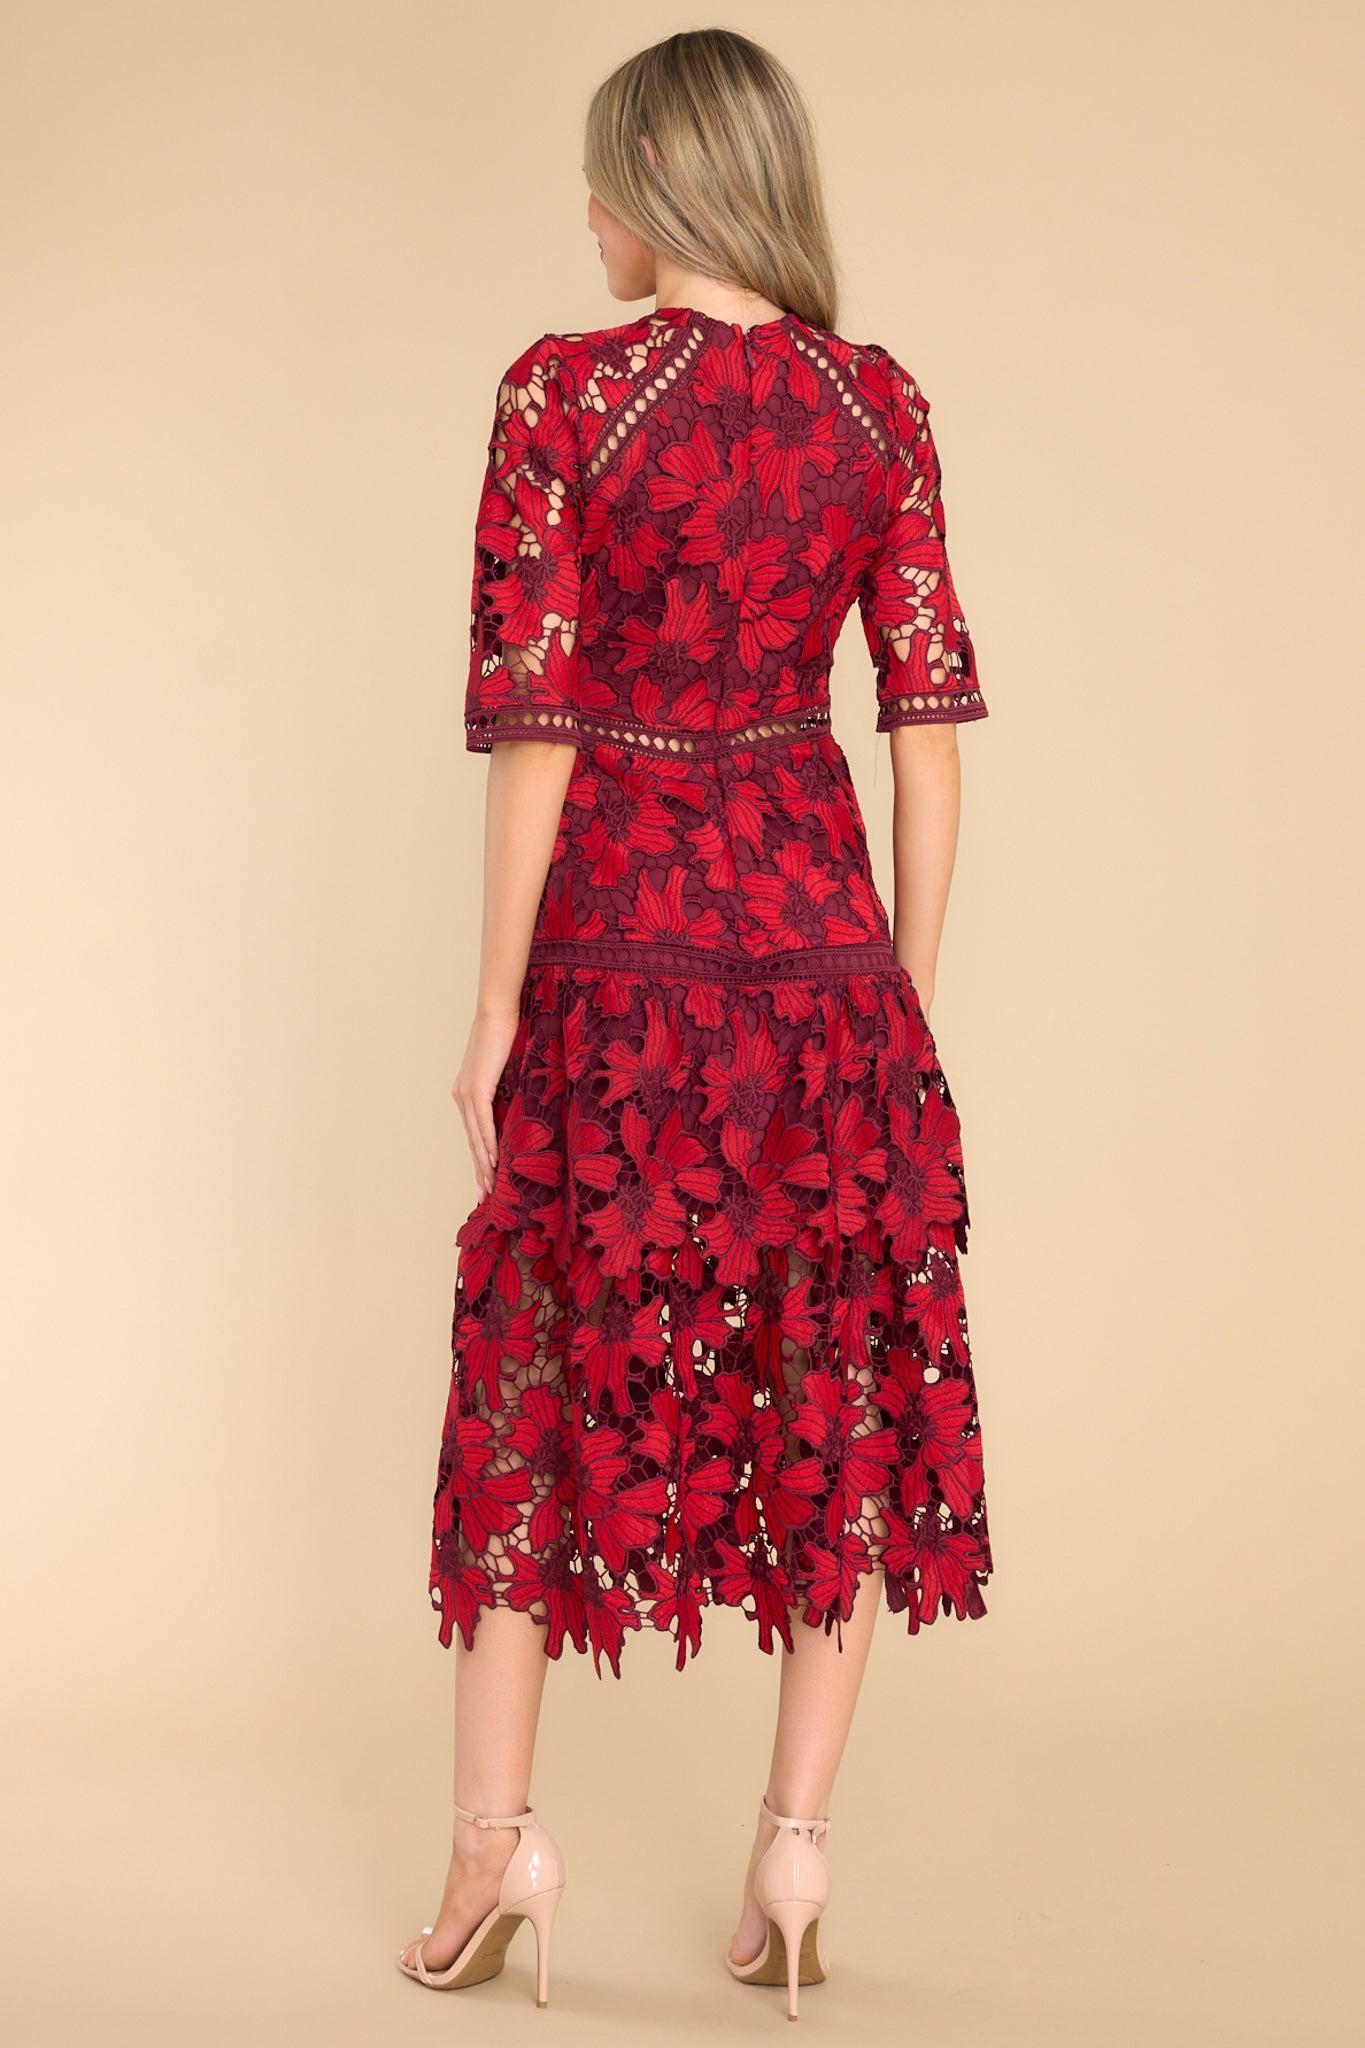 Get To The Point Red Lace Midi Dress Product Image